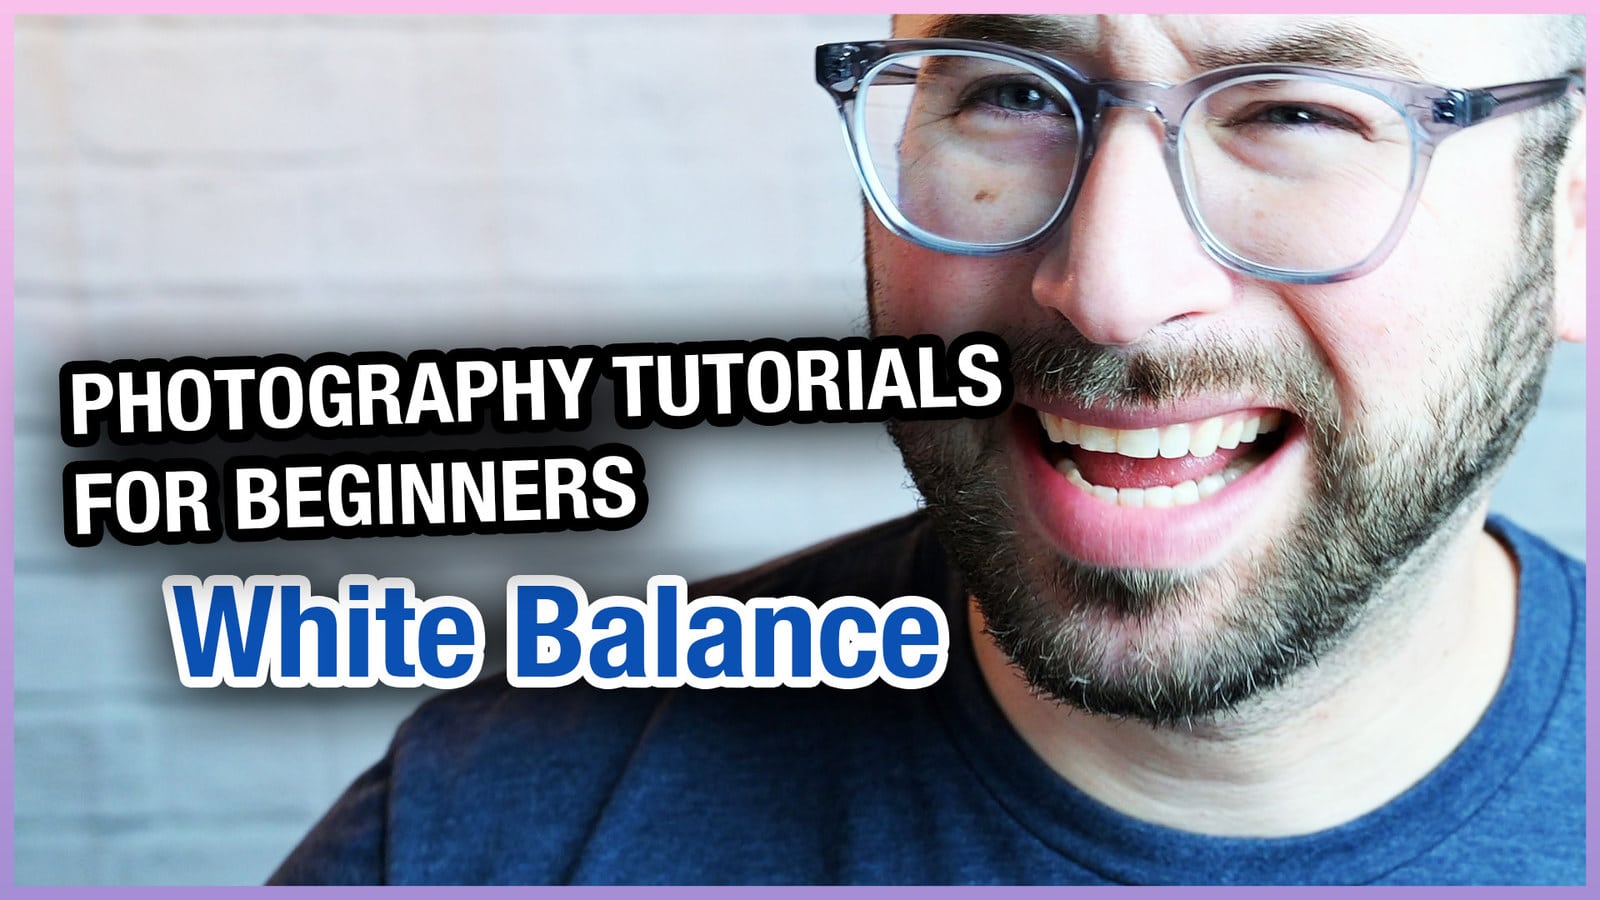 Photography Tutorials For Beginners - White Balance